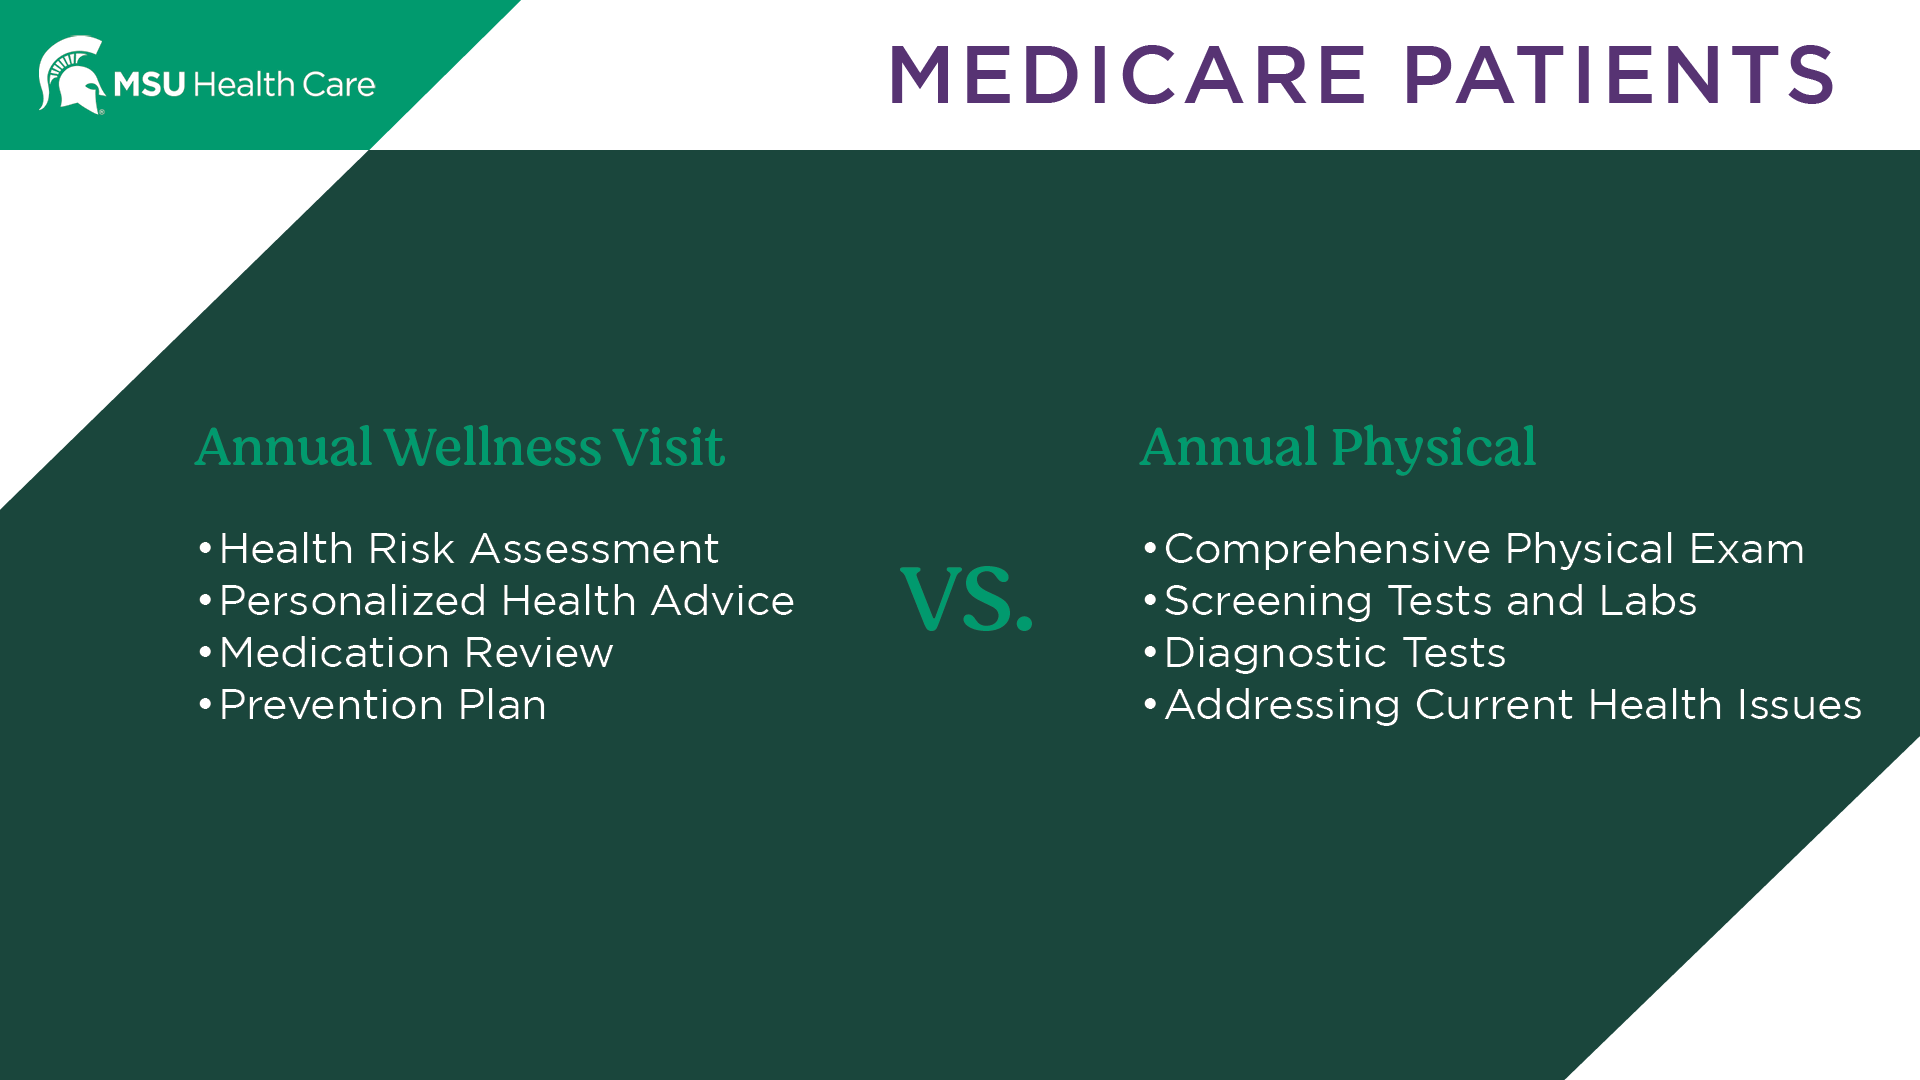 An infographic listing the differences between an annual wellness visit and an annual physical